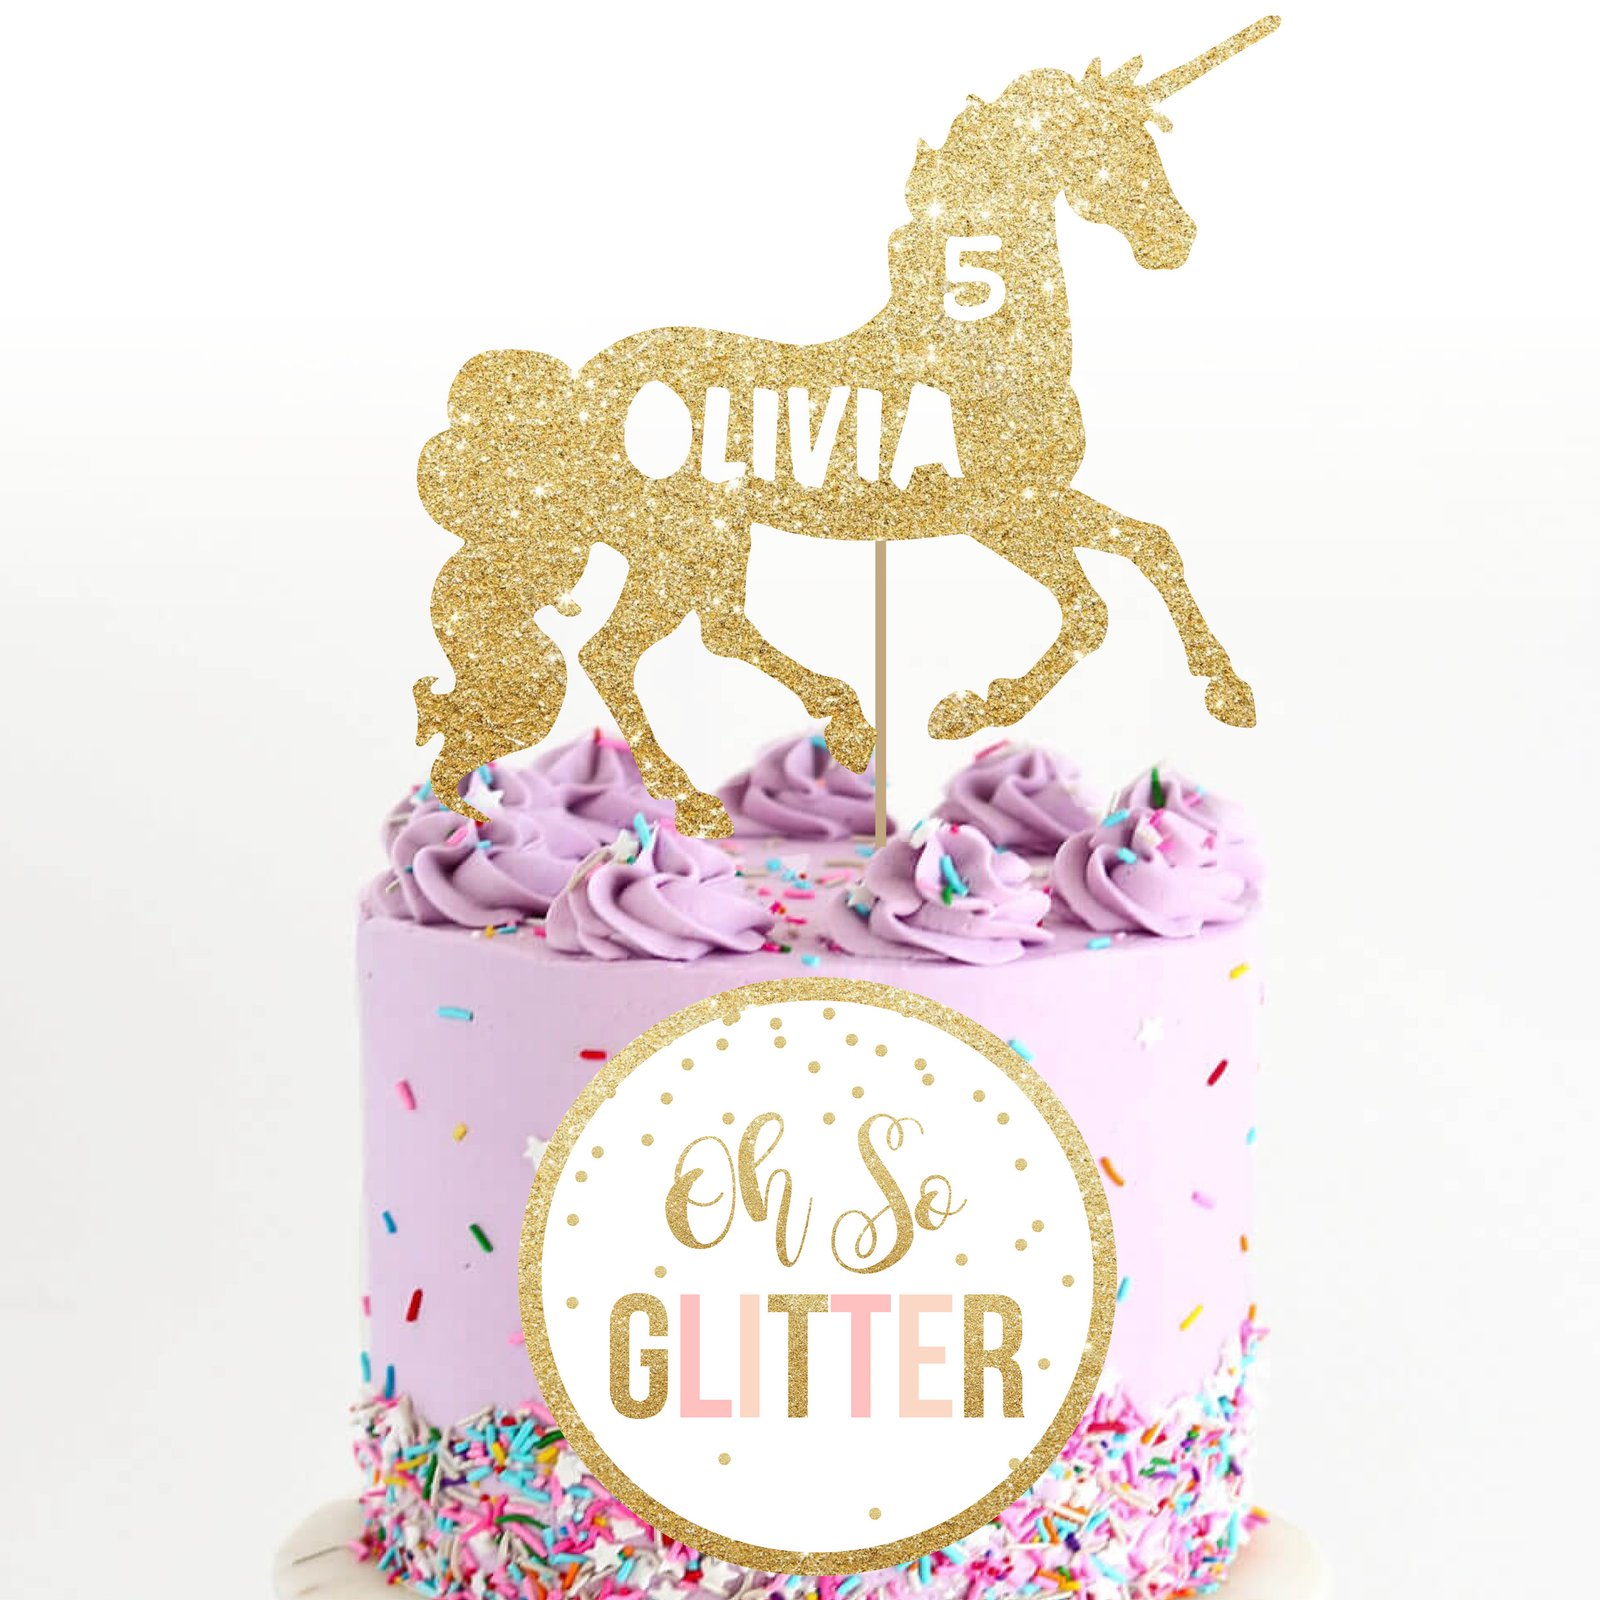 Unicorn Cake - Gold Horn and Mane Colors – Patty's Cakes and Desserts